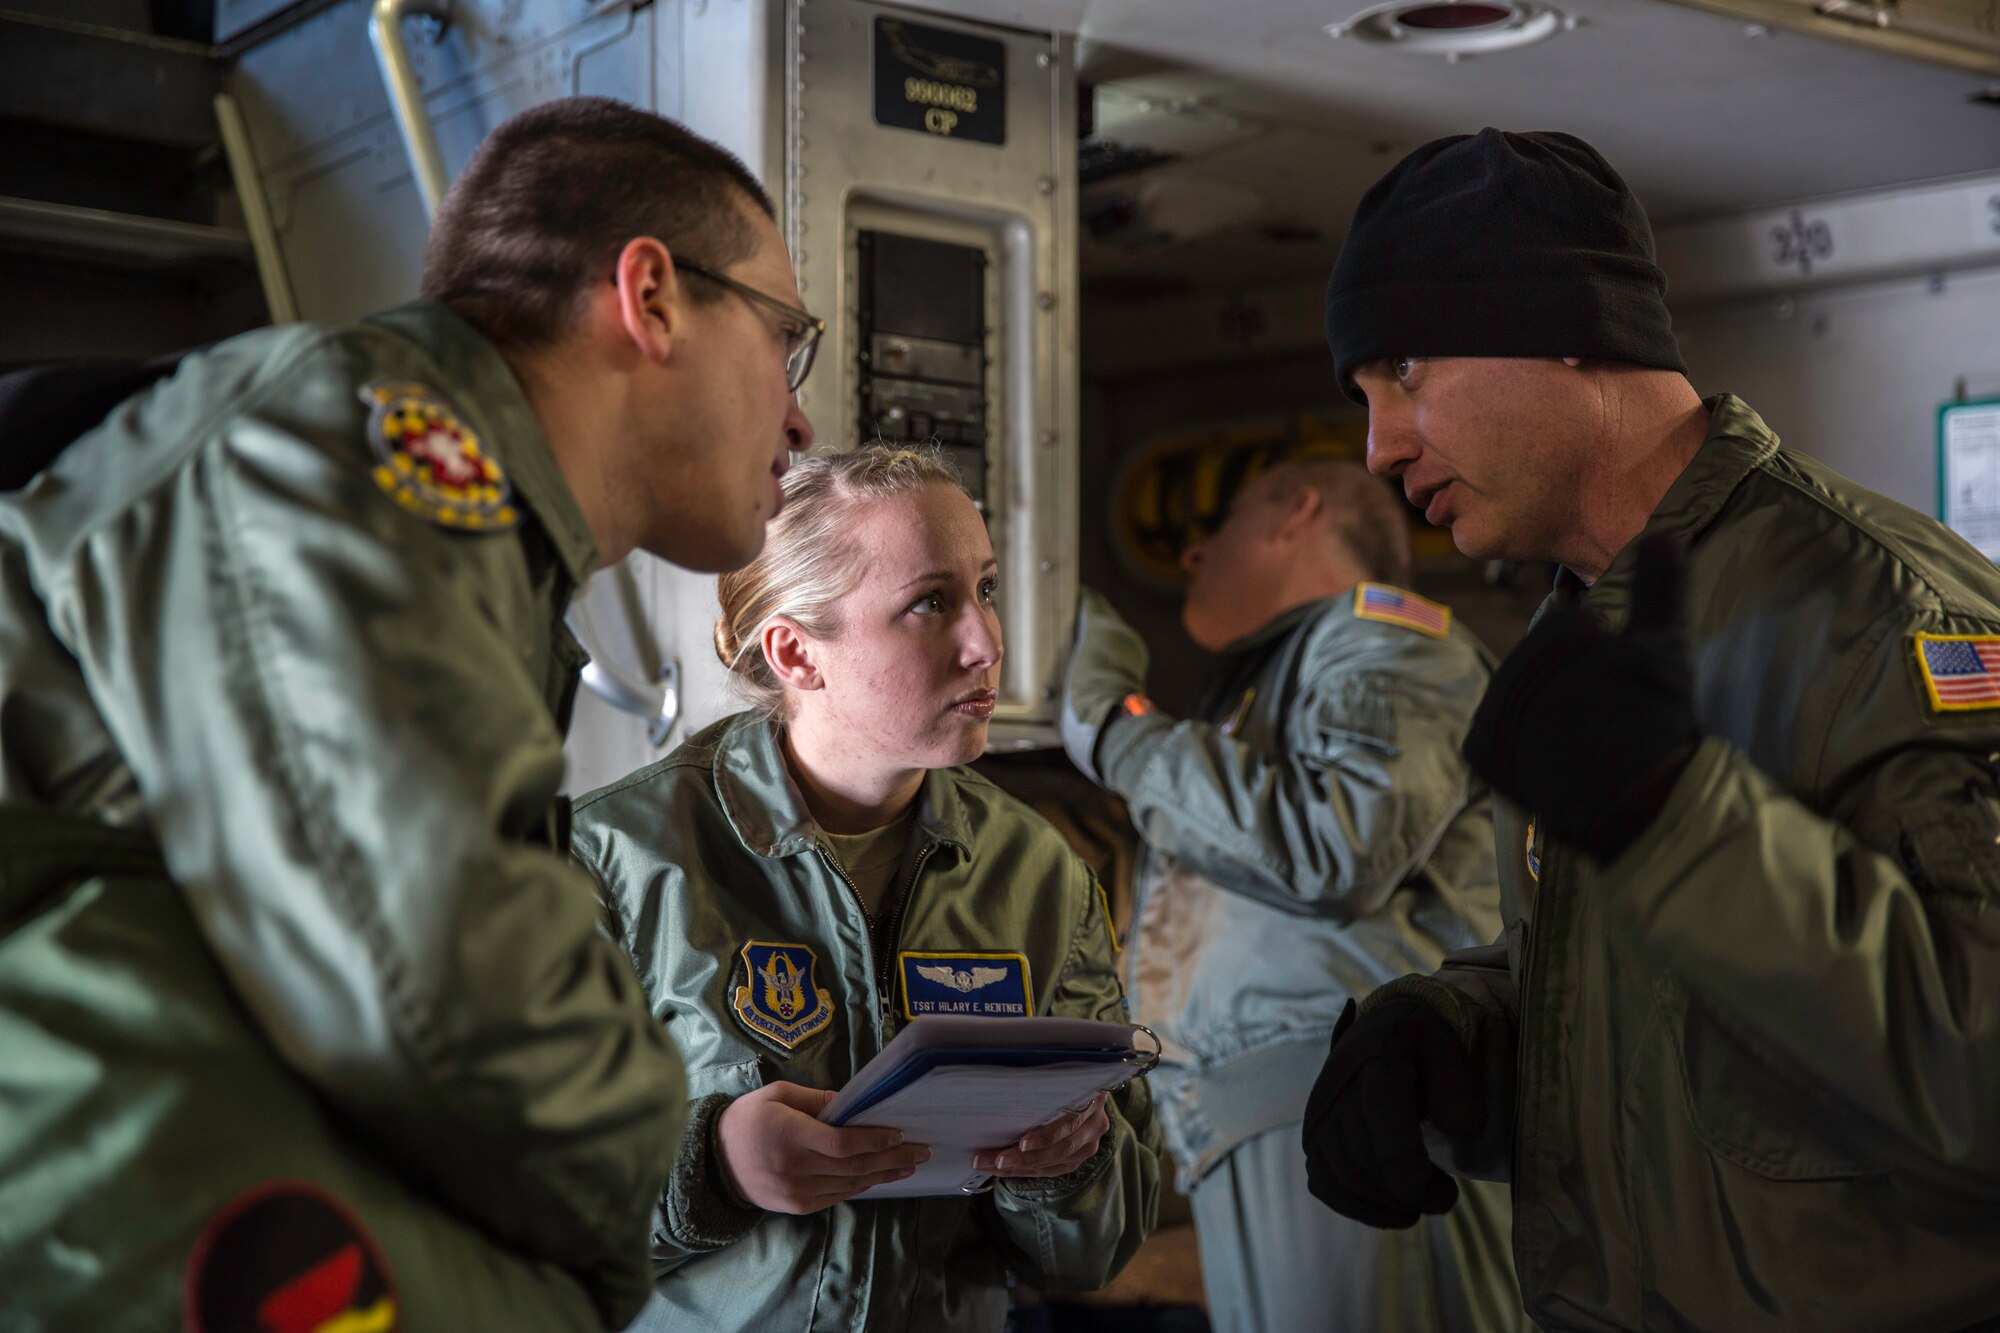 Tech. Sgt. Arrin Baker discusses load plan and patient configuration with Tech. Sgt. Hilary Rentner and Tech. Sgt. James Laska Feb. 21, 2015 during a training mission in San Juan, Puerto Rico. The training mission was part of a three day fly-away with Airmen from the 315th Airlift Wing at Joint Base Charleston, S.C. and aeromedical Airmen from the 459th Air Refueling Wing at Joint Base Andrews, Md. The training mission was a cost-effective means to accomplish currency items and evaluations for flight crew members and provided C-17 familiarization and proficiency training for aeromedical Airmen. Baker is a load master with the 300th Airlift Squadron. Rentner and Laska are aeromedical technicians with the 459th Aeromedical Evacuation Squadron. (U.S. Air Force Photo/Tech. Sgt. Shane Ellis)